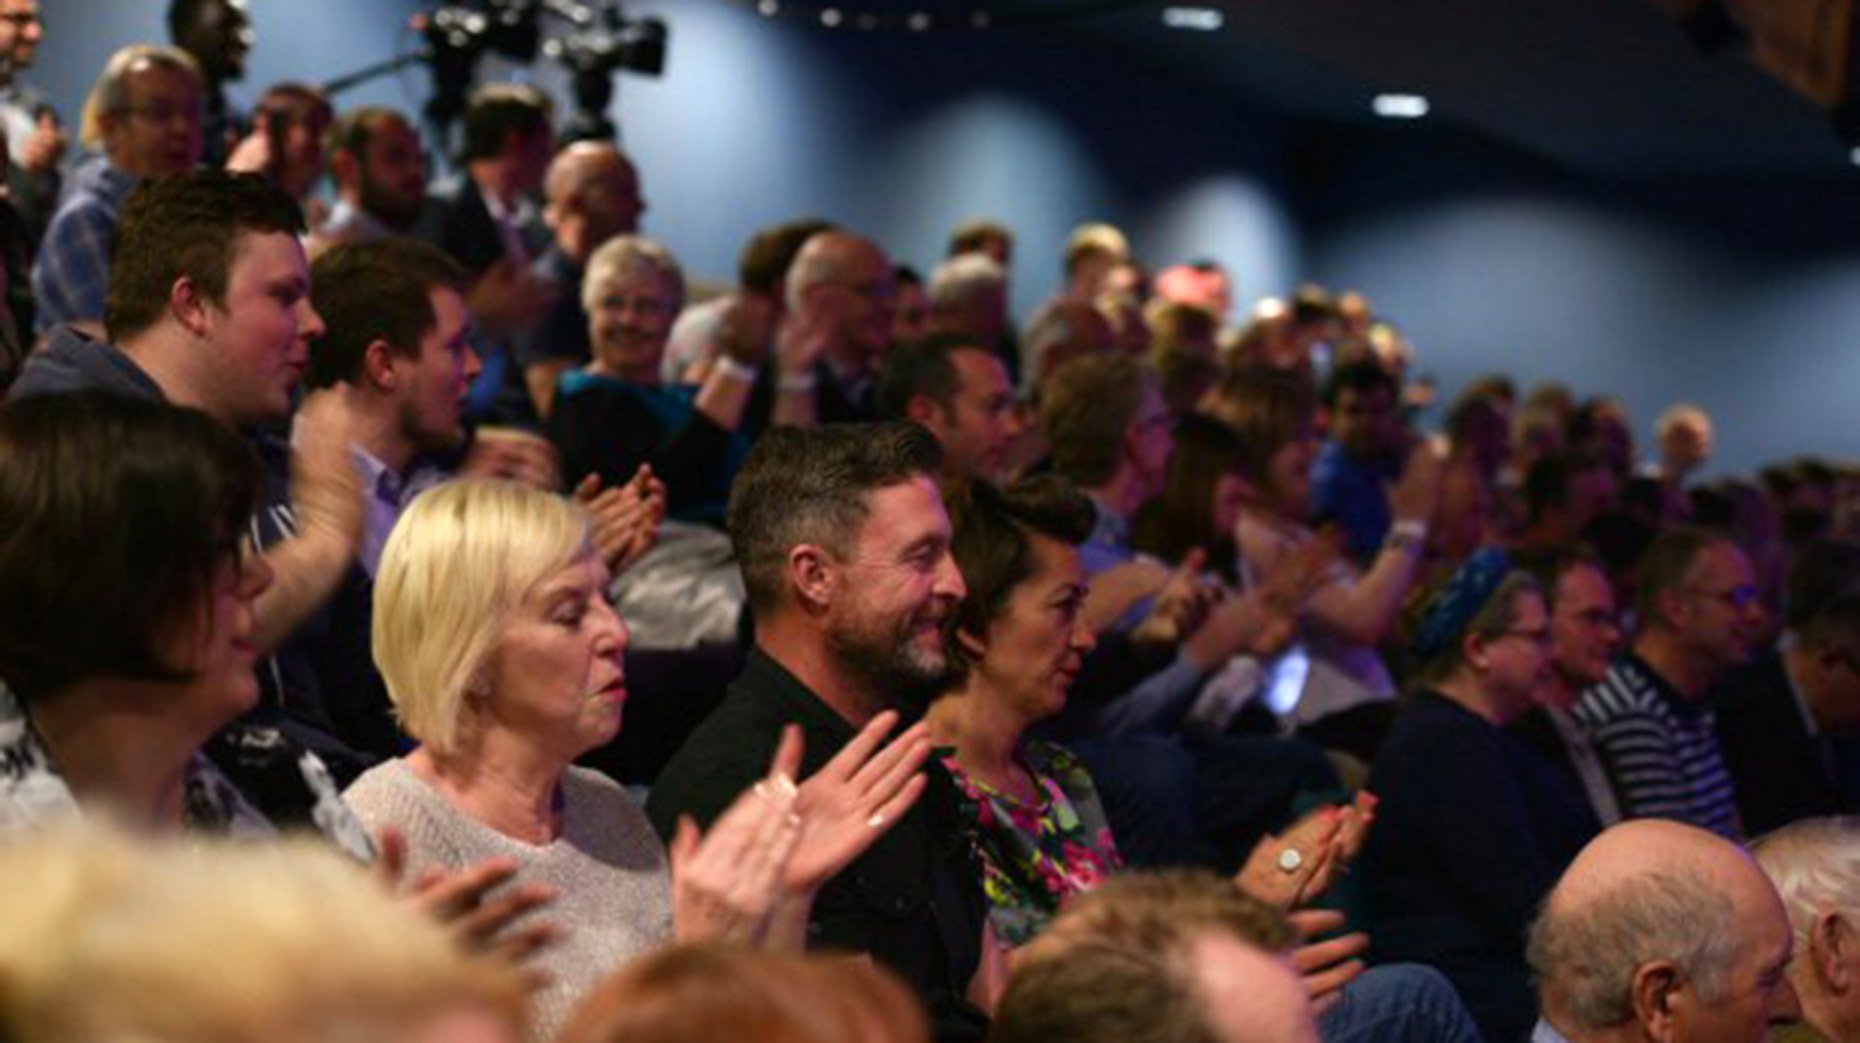 The 200-string audience at The Lincoln Debate. Photo: Steve Smailes for The Lincolnite